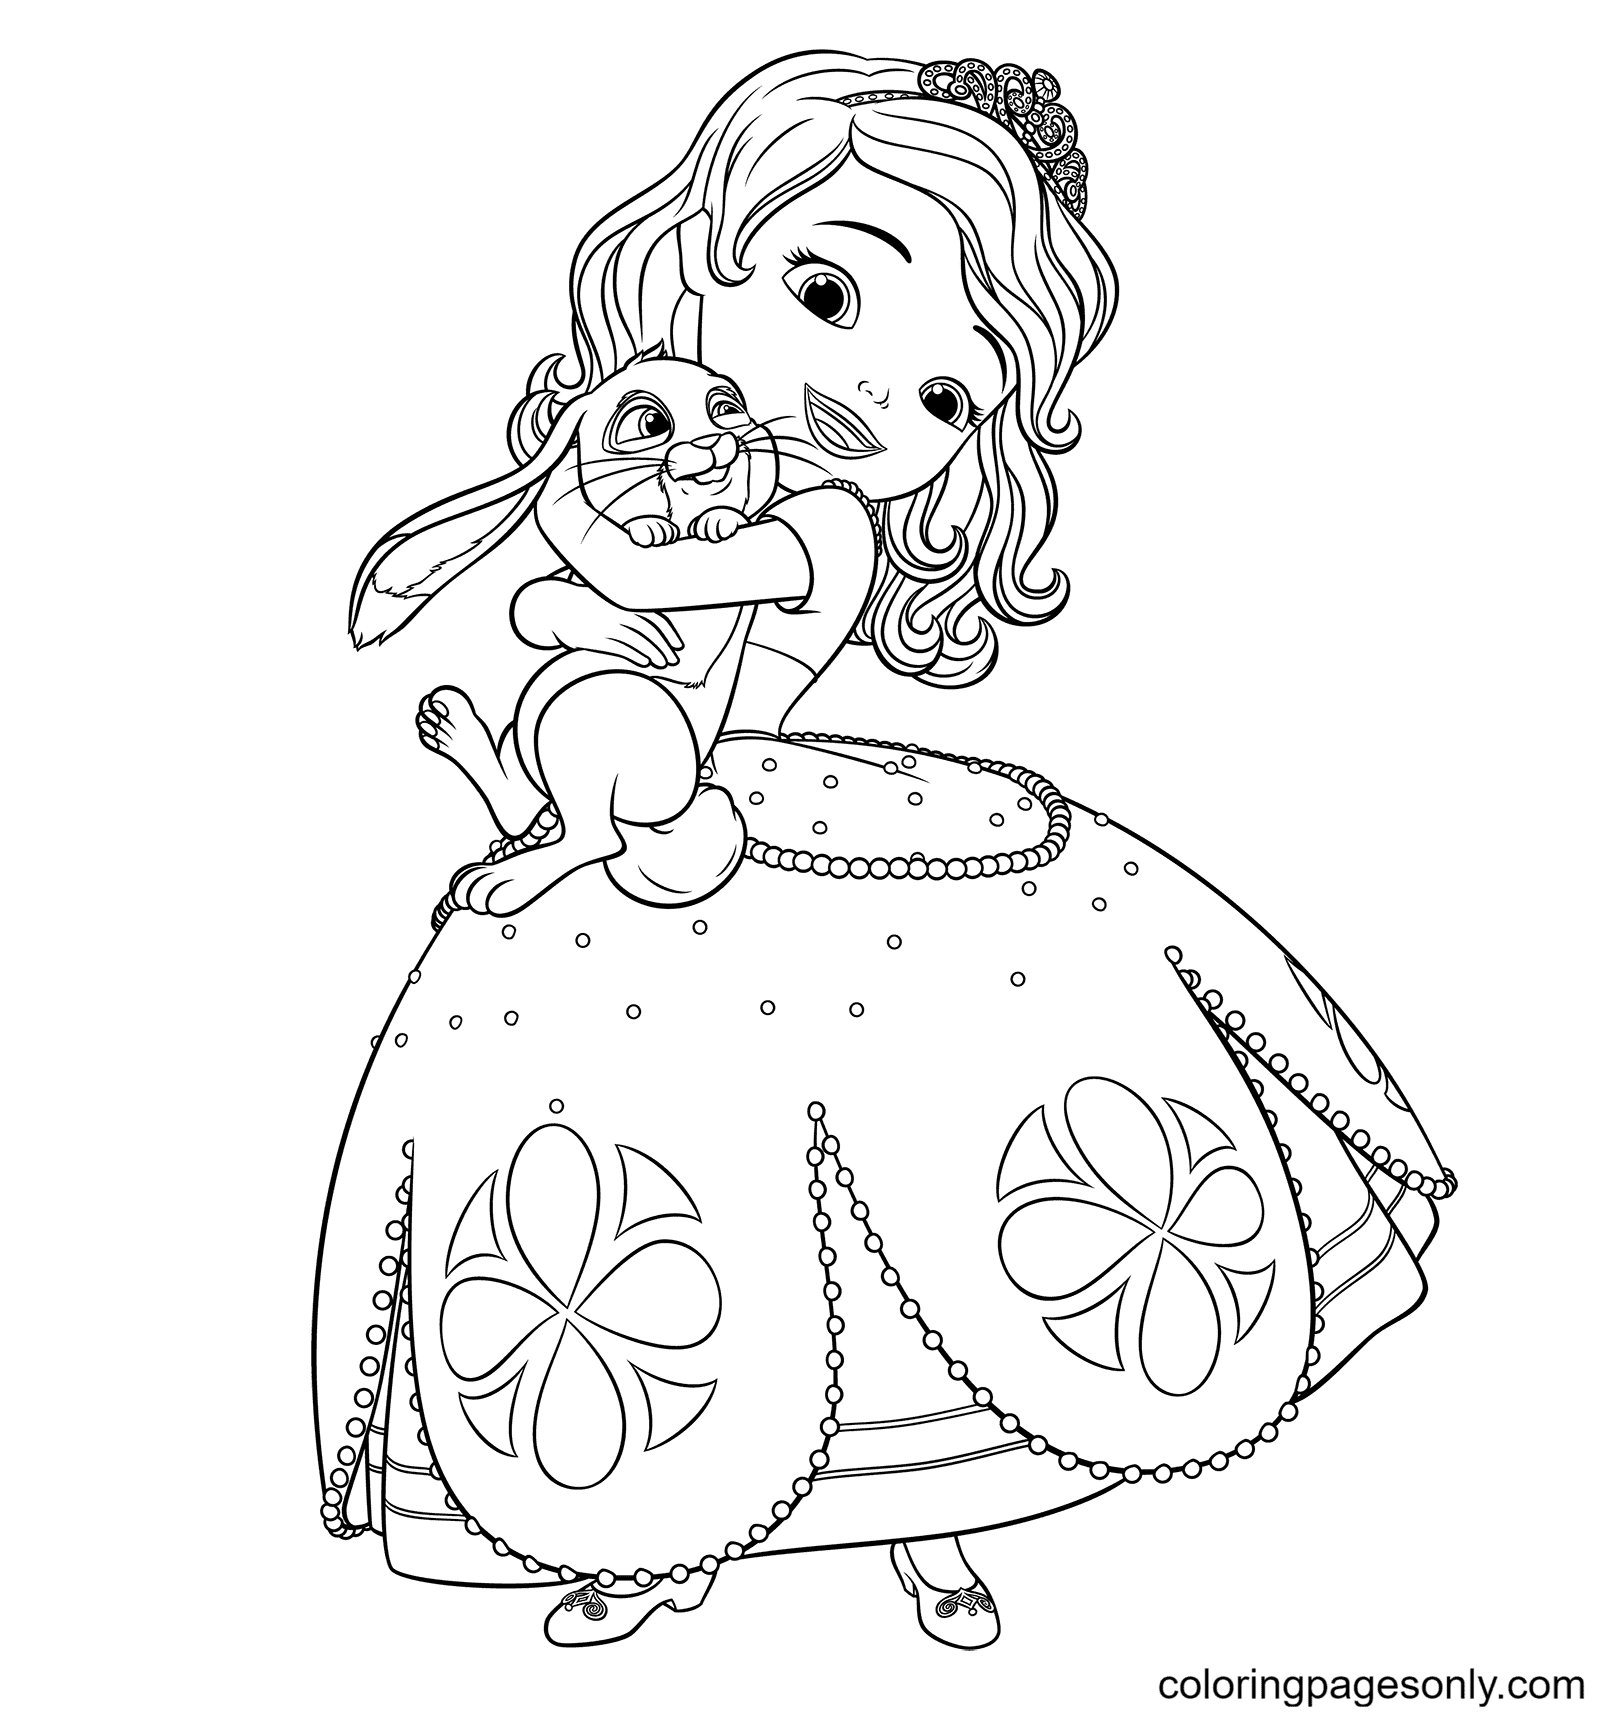 Sofia hugs Clover Coloring Page